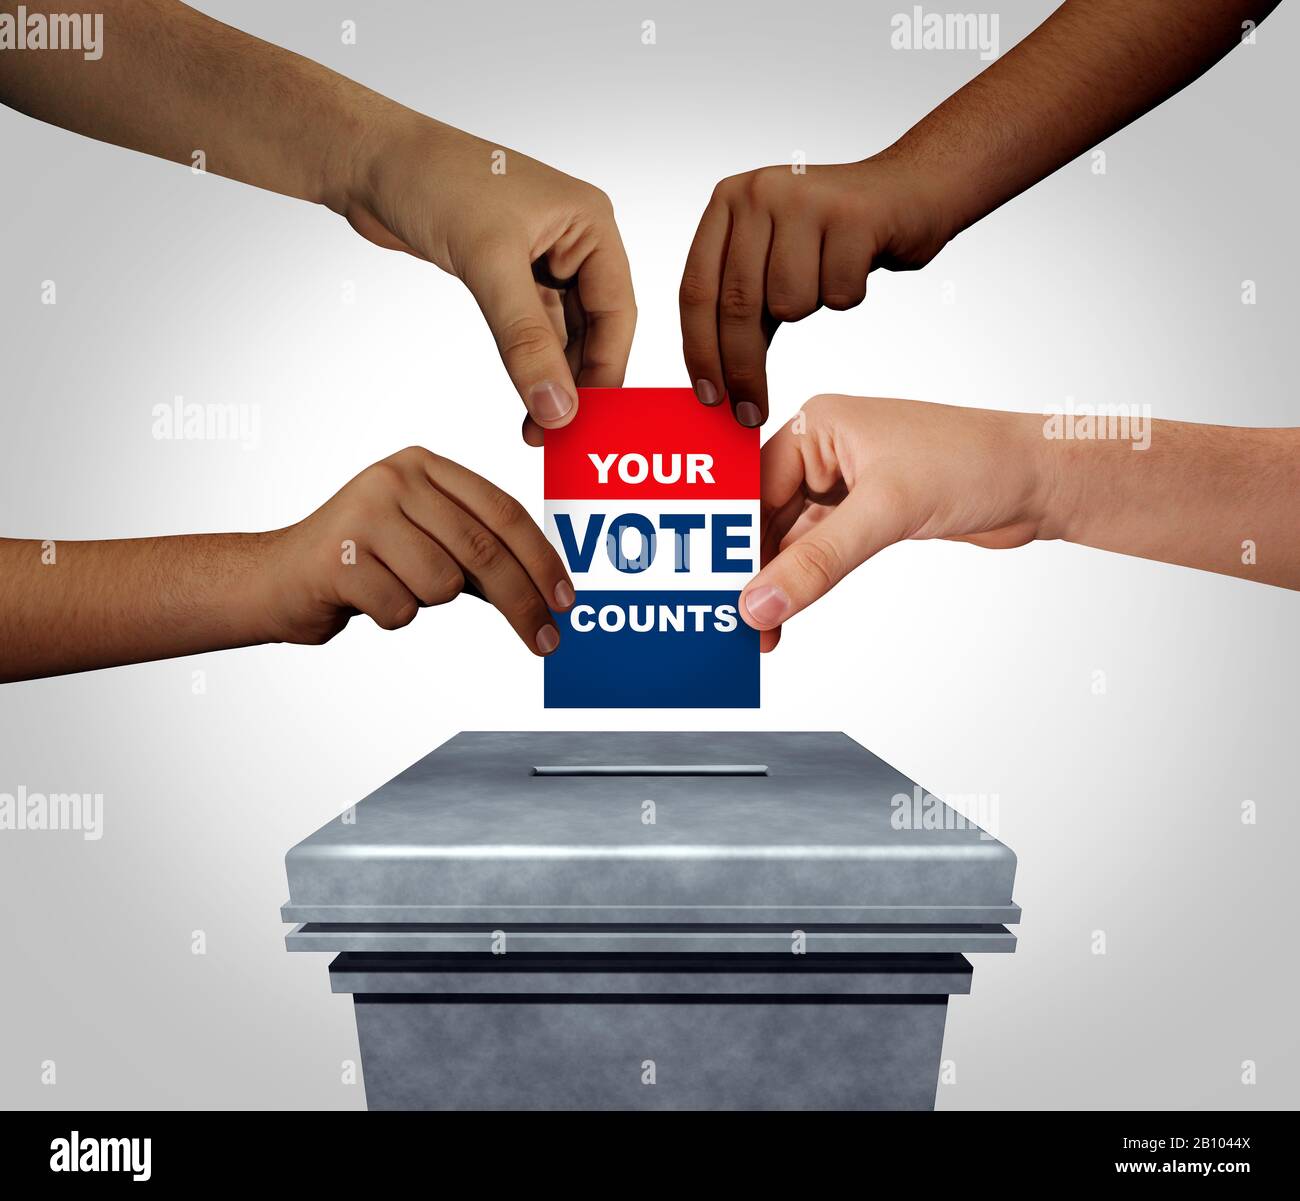 Your vote counts as diverse hands casting a ballot at a voting polling station as an election and democracy concept or diversity in democracy . Stock Photo